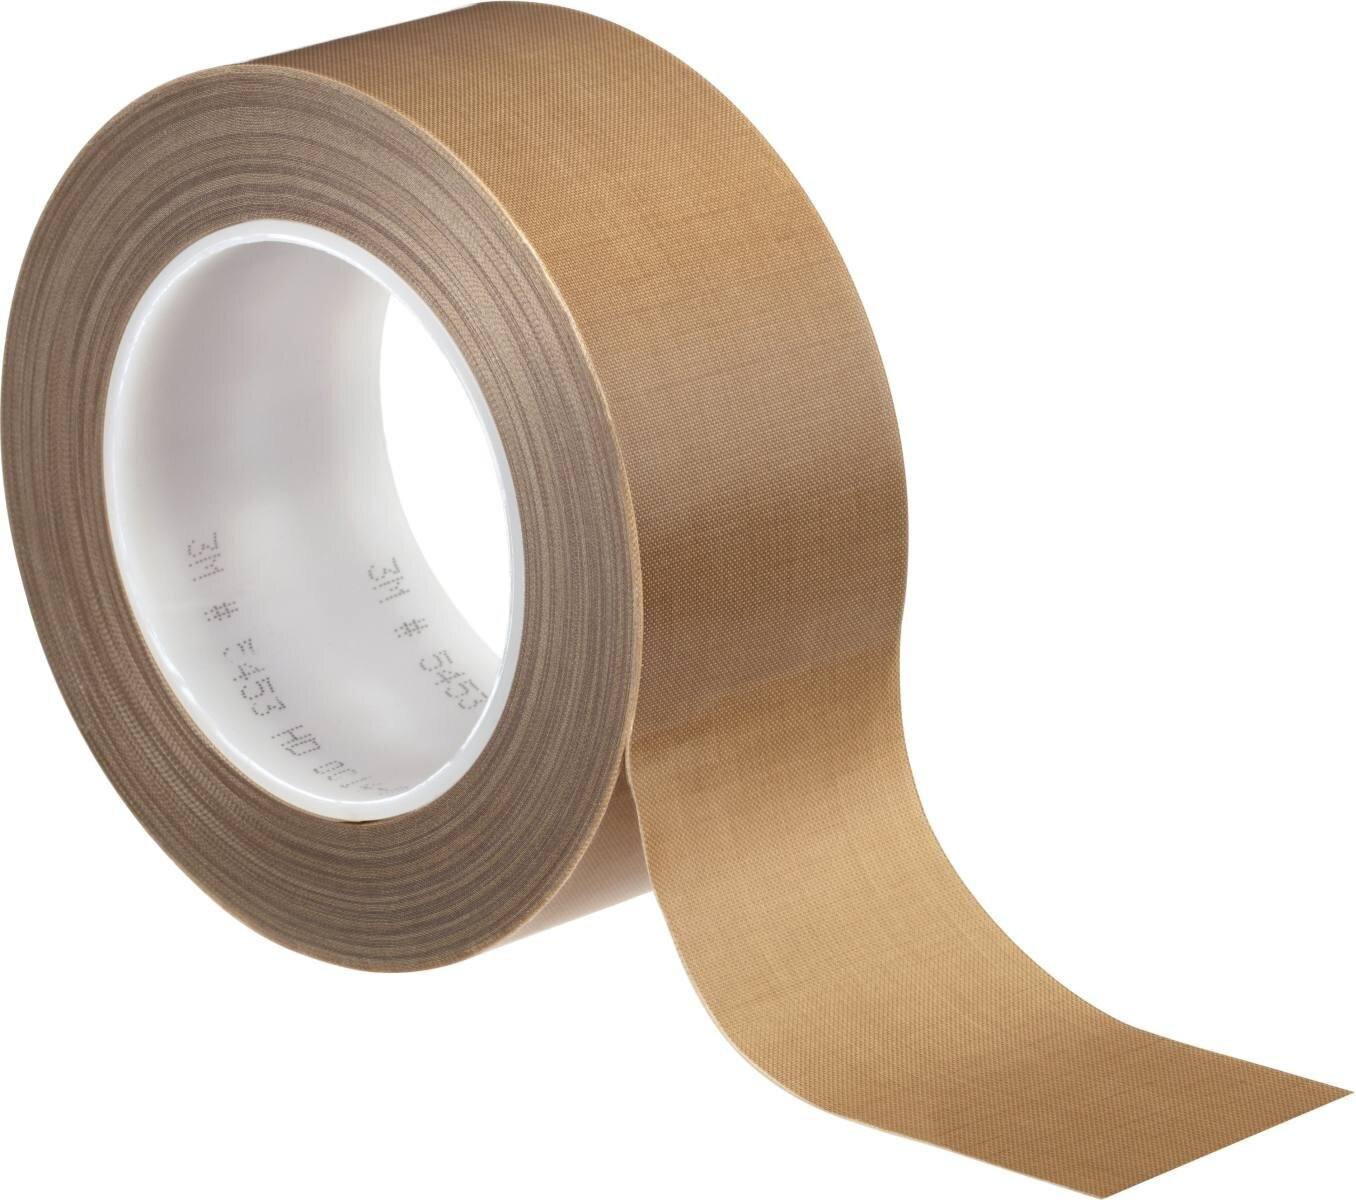 3M 5453 PTFE glass adhesive tape 50mmx33m, 0.22mm, silicone